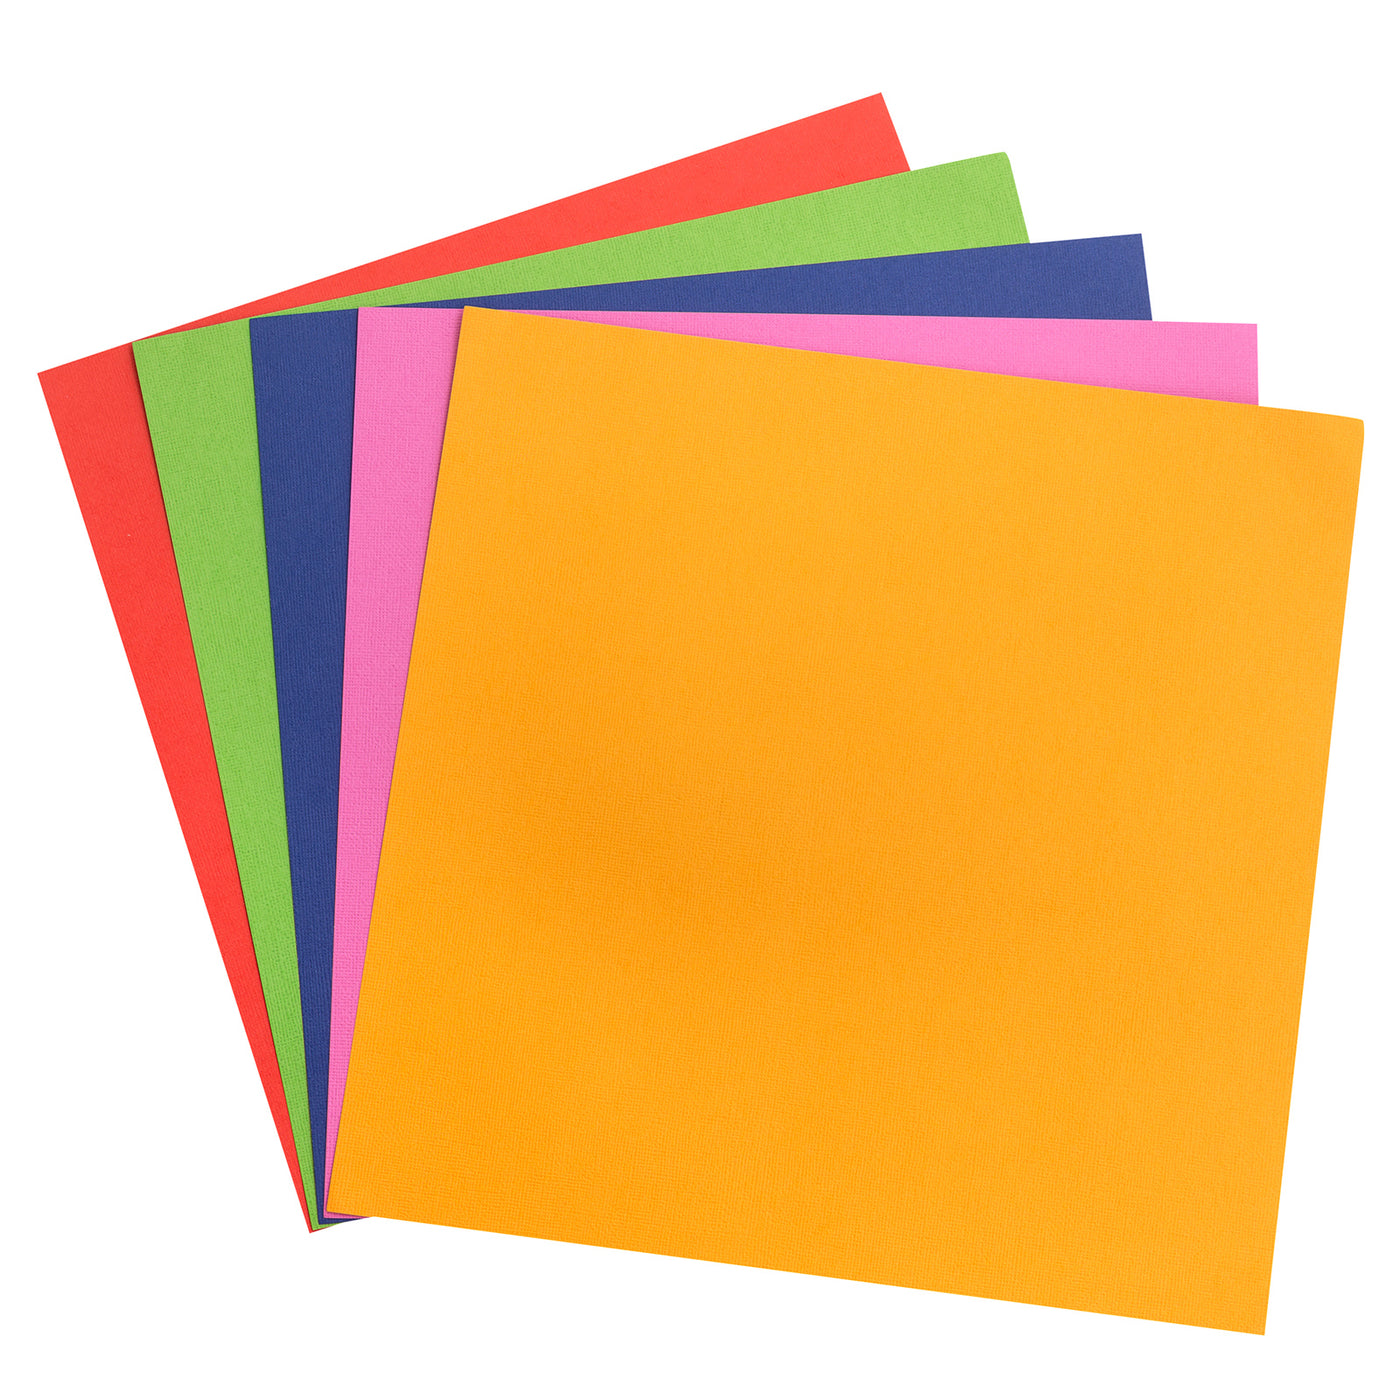 Brights Variety Pack has 60 sheets of 12x12 textured cardstock